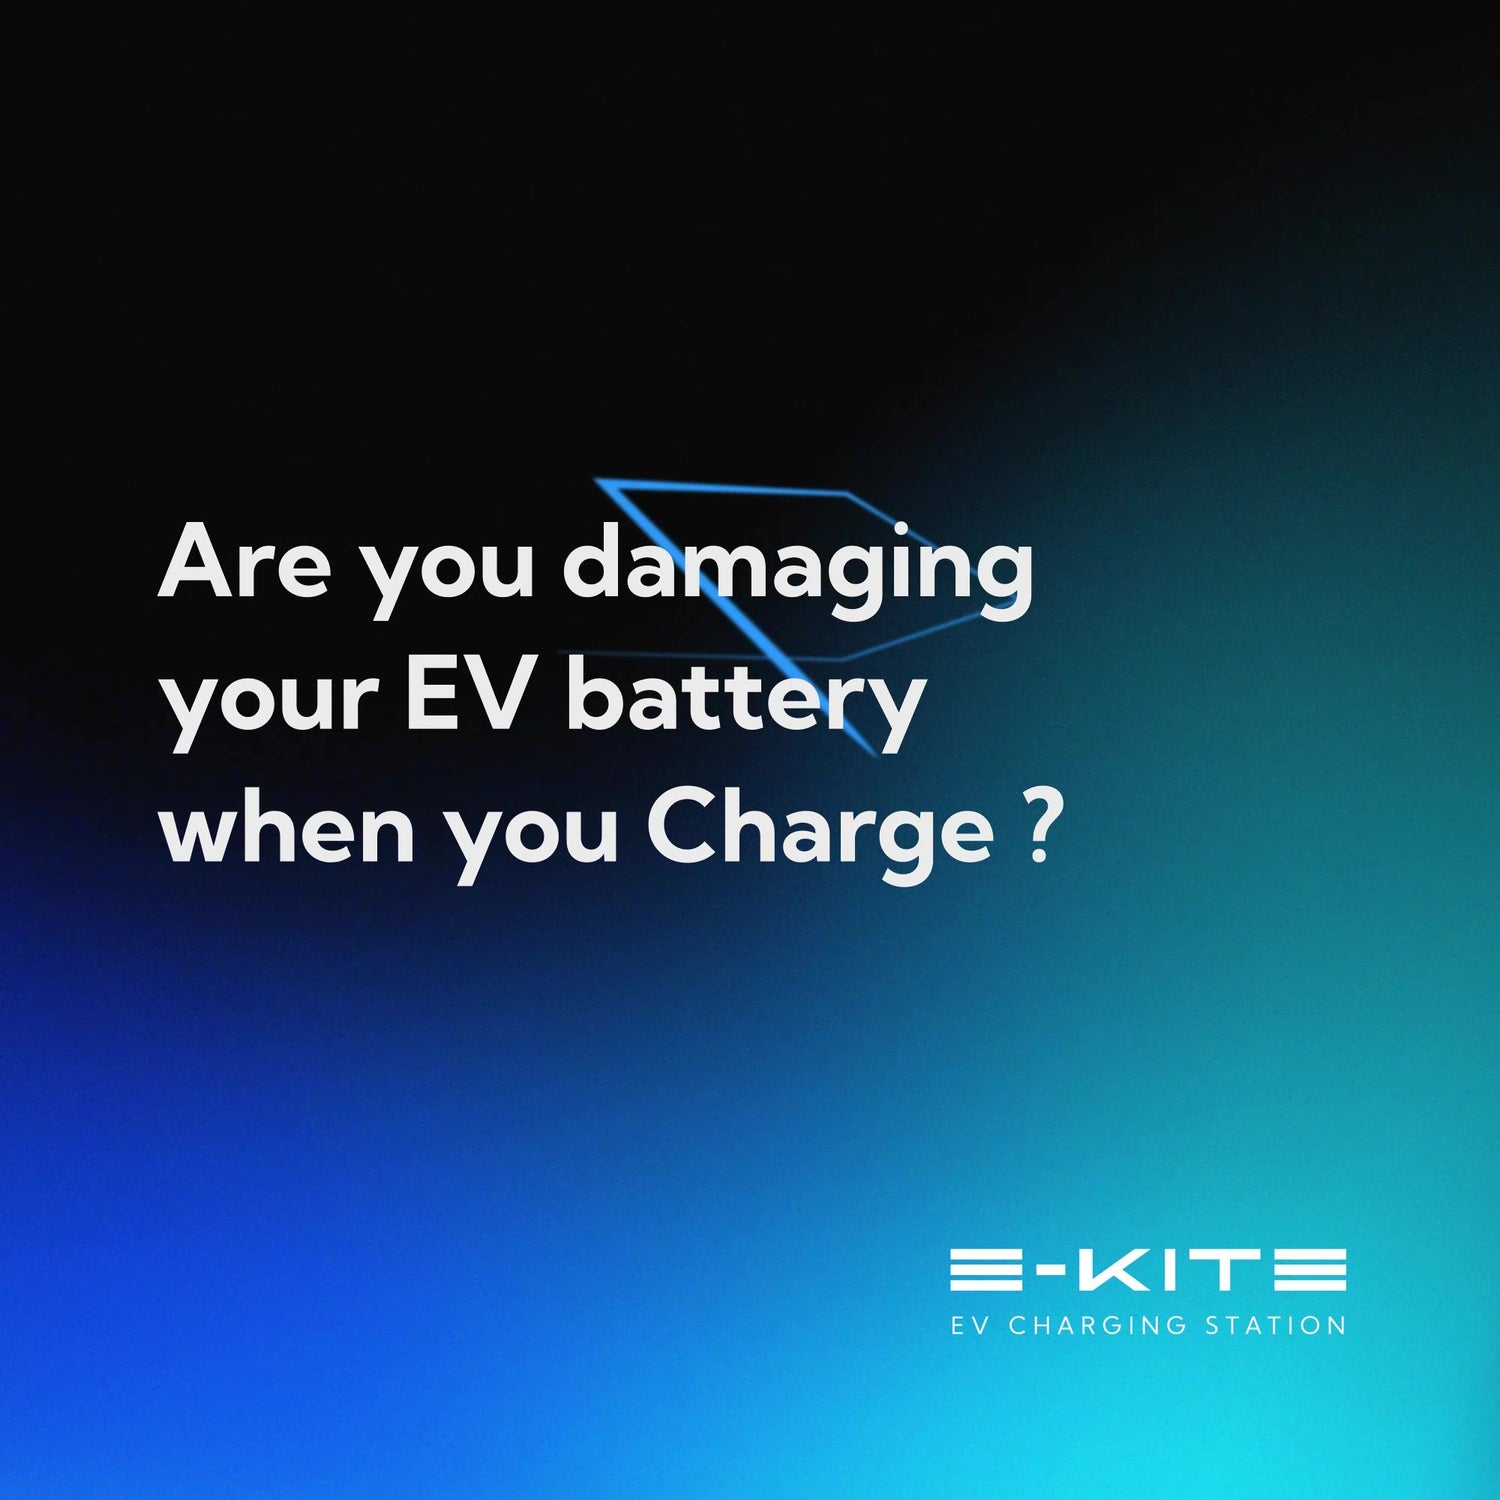 A blue image display are you damaging your EV battery when you charge.